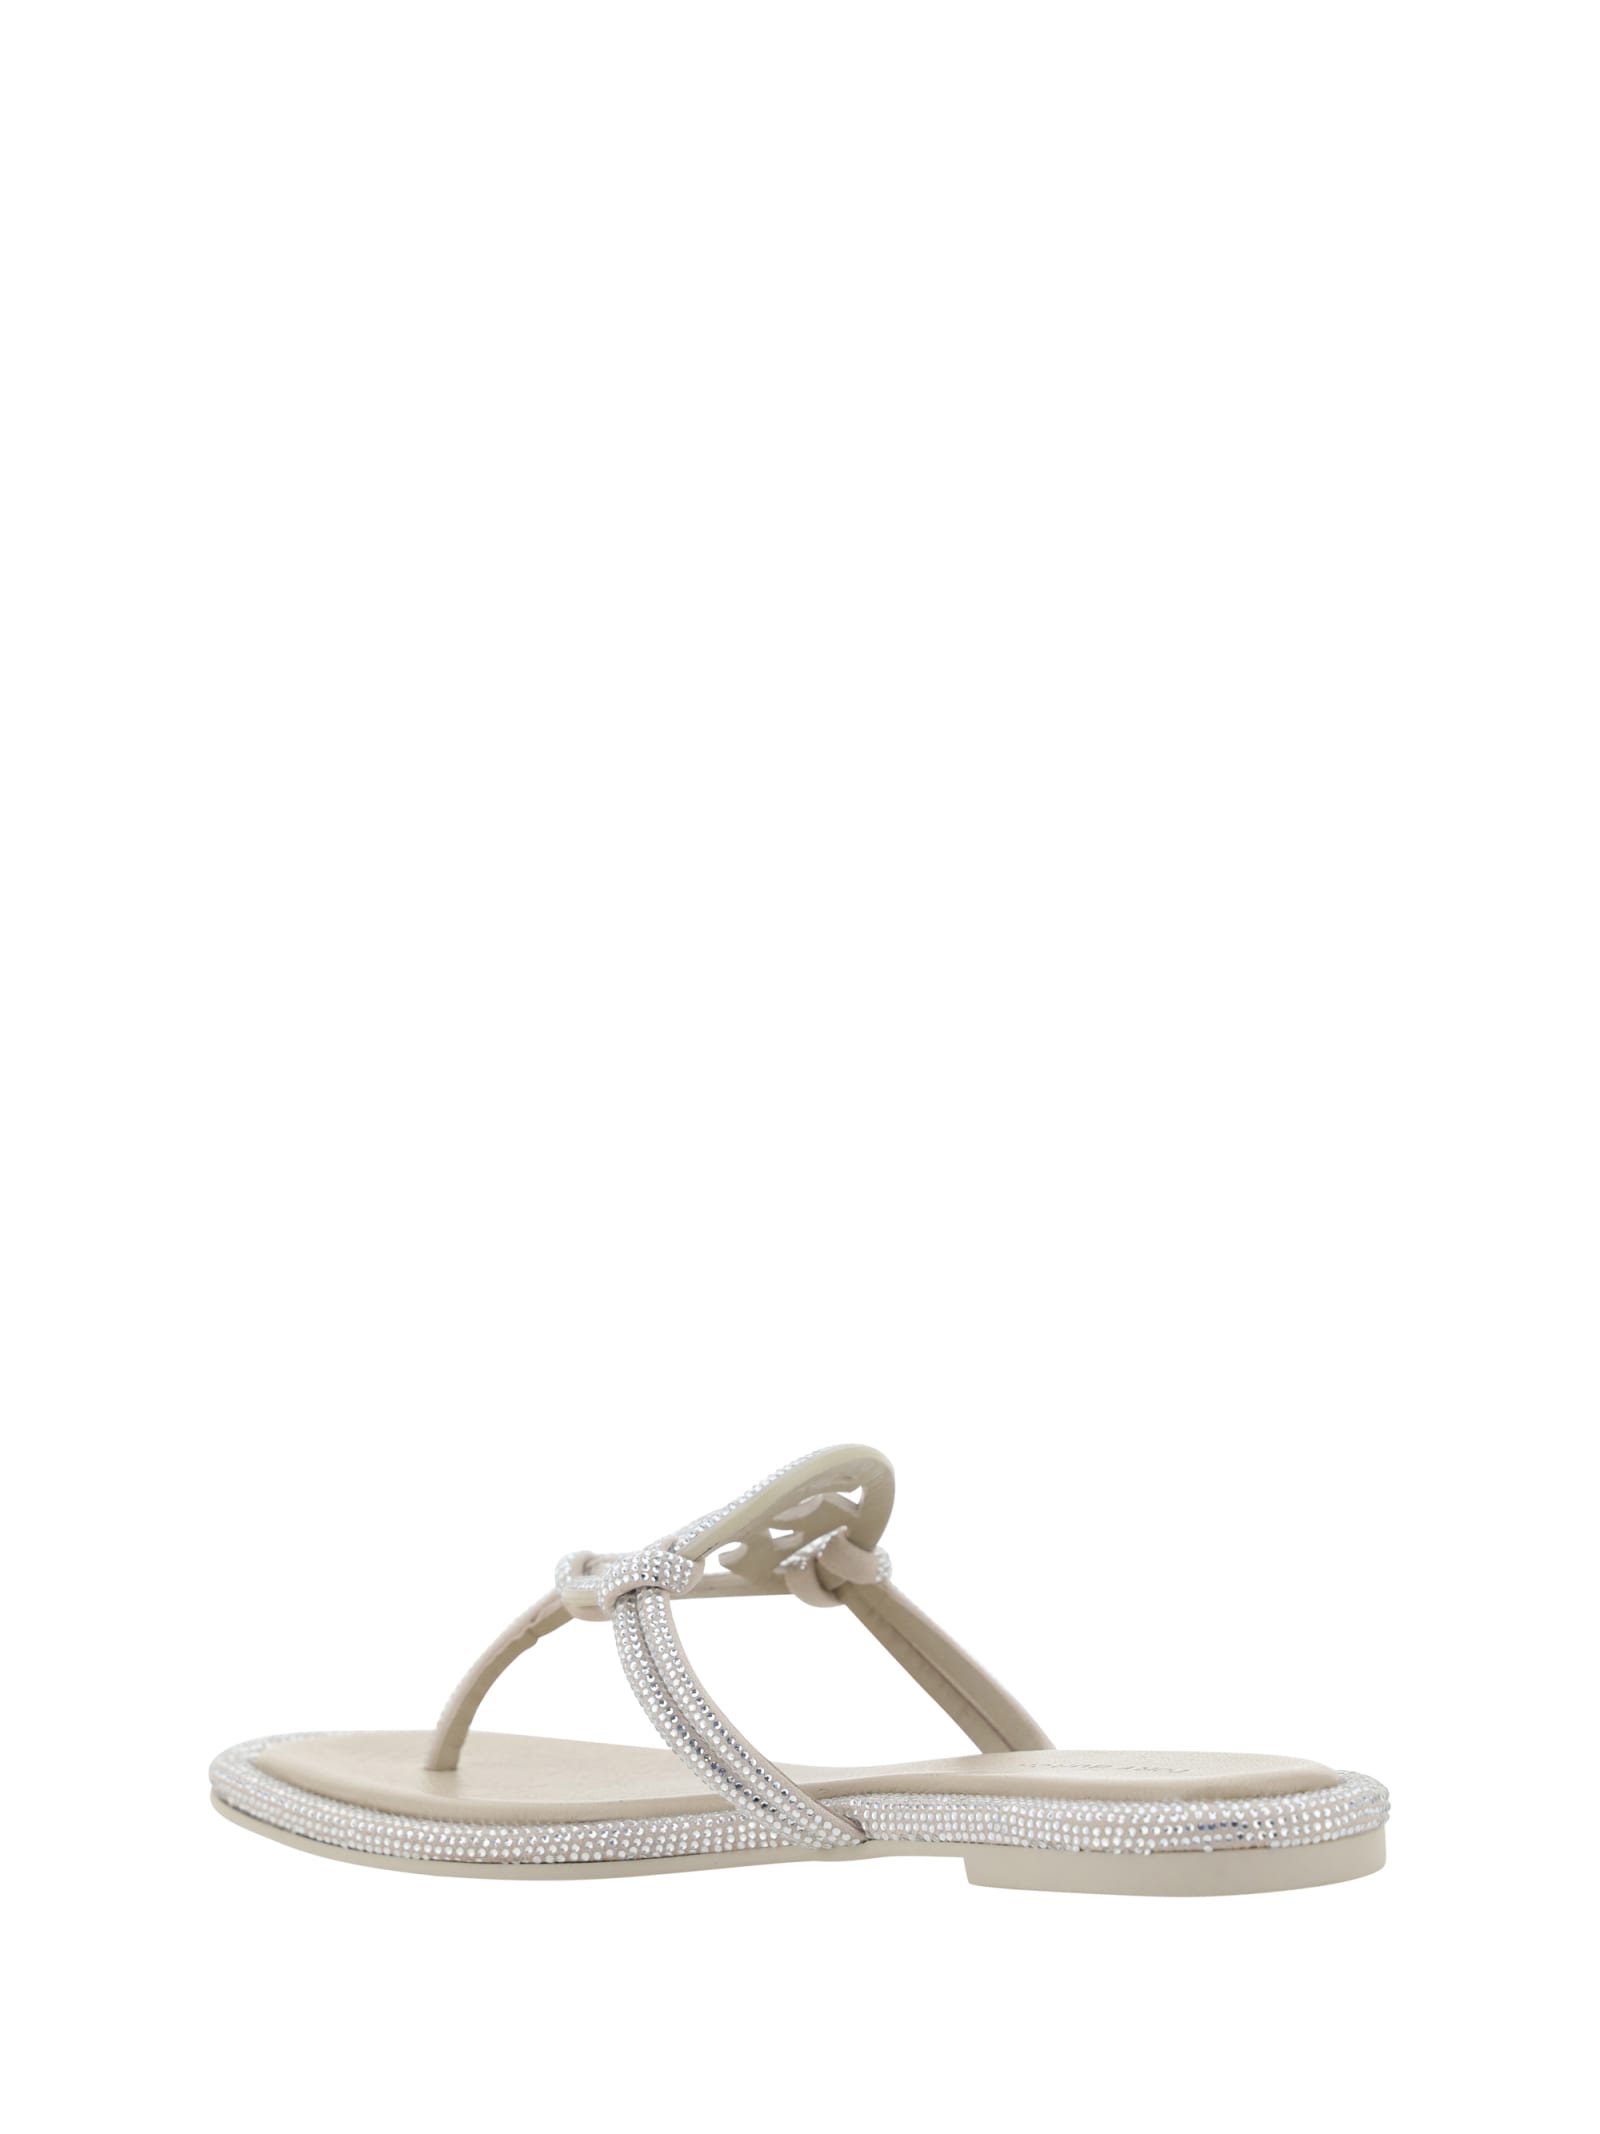 Shop Tory Burch Miller Sandals In Stone Gray